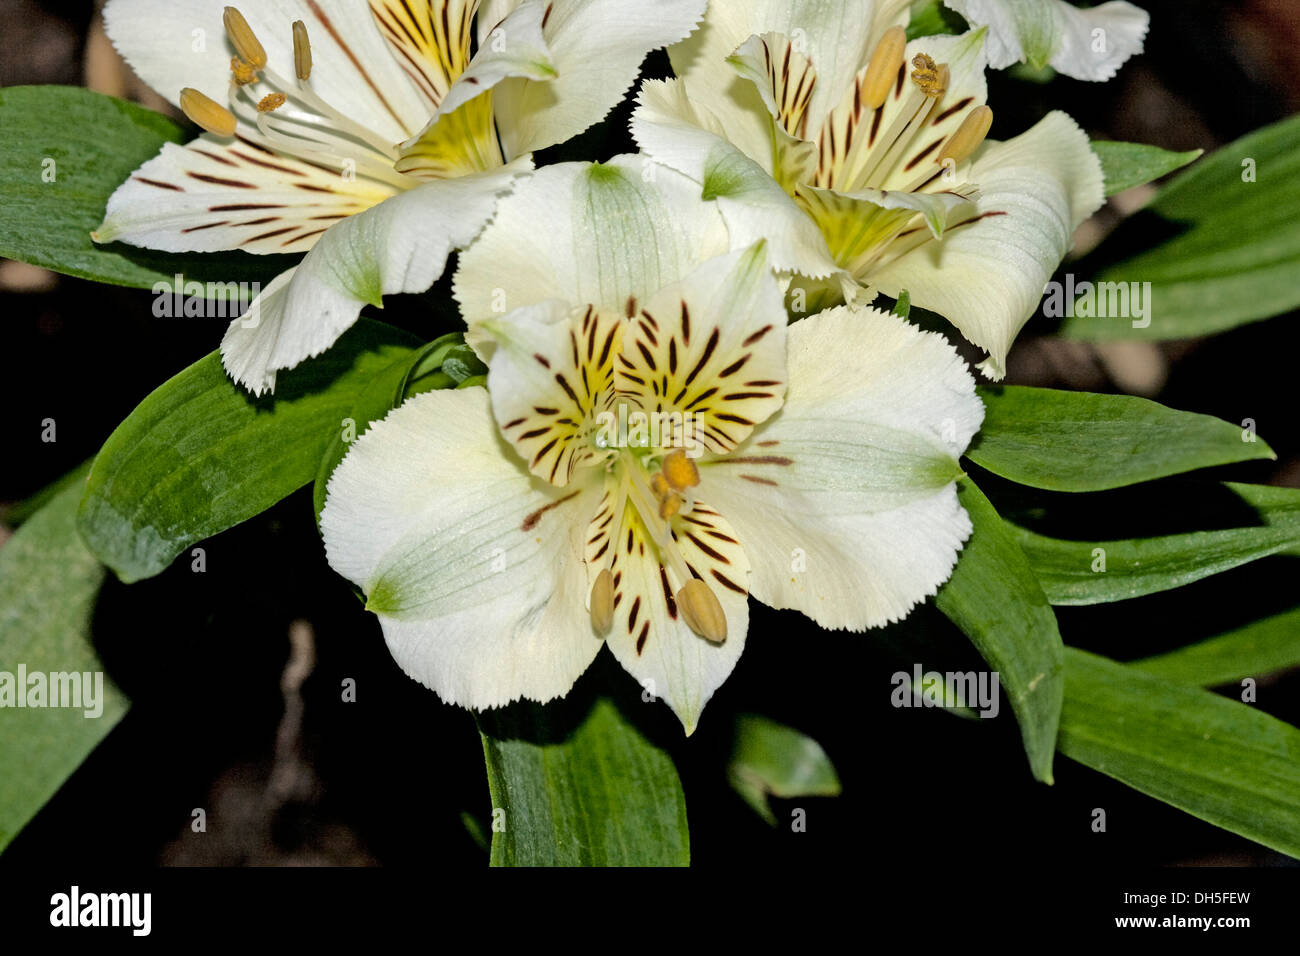 White flowers and green leaves of Alstroemeria cultivar Camilla - Princess / Peruvian lily Stock Photo